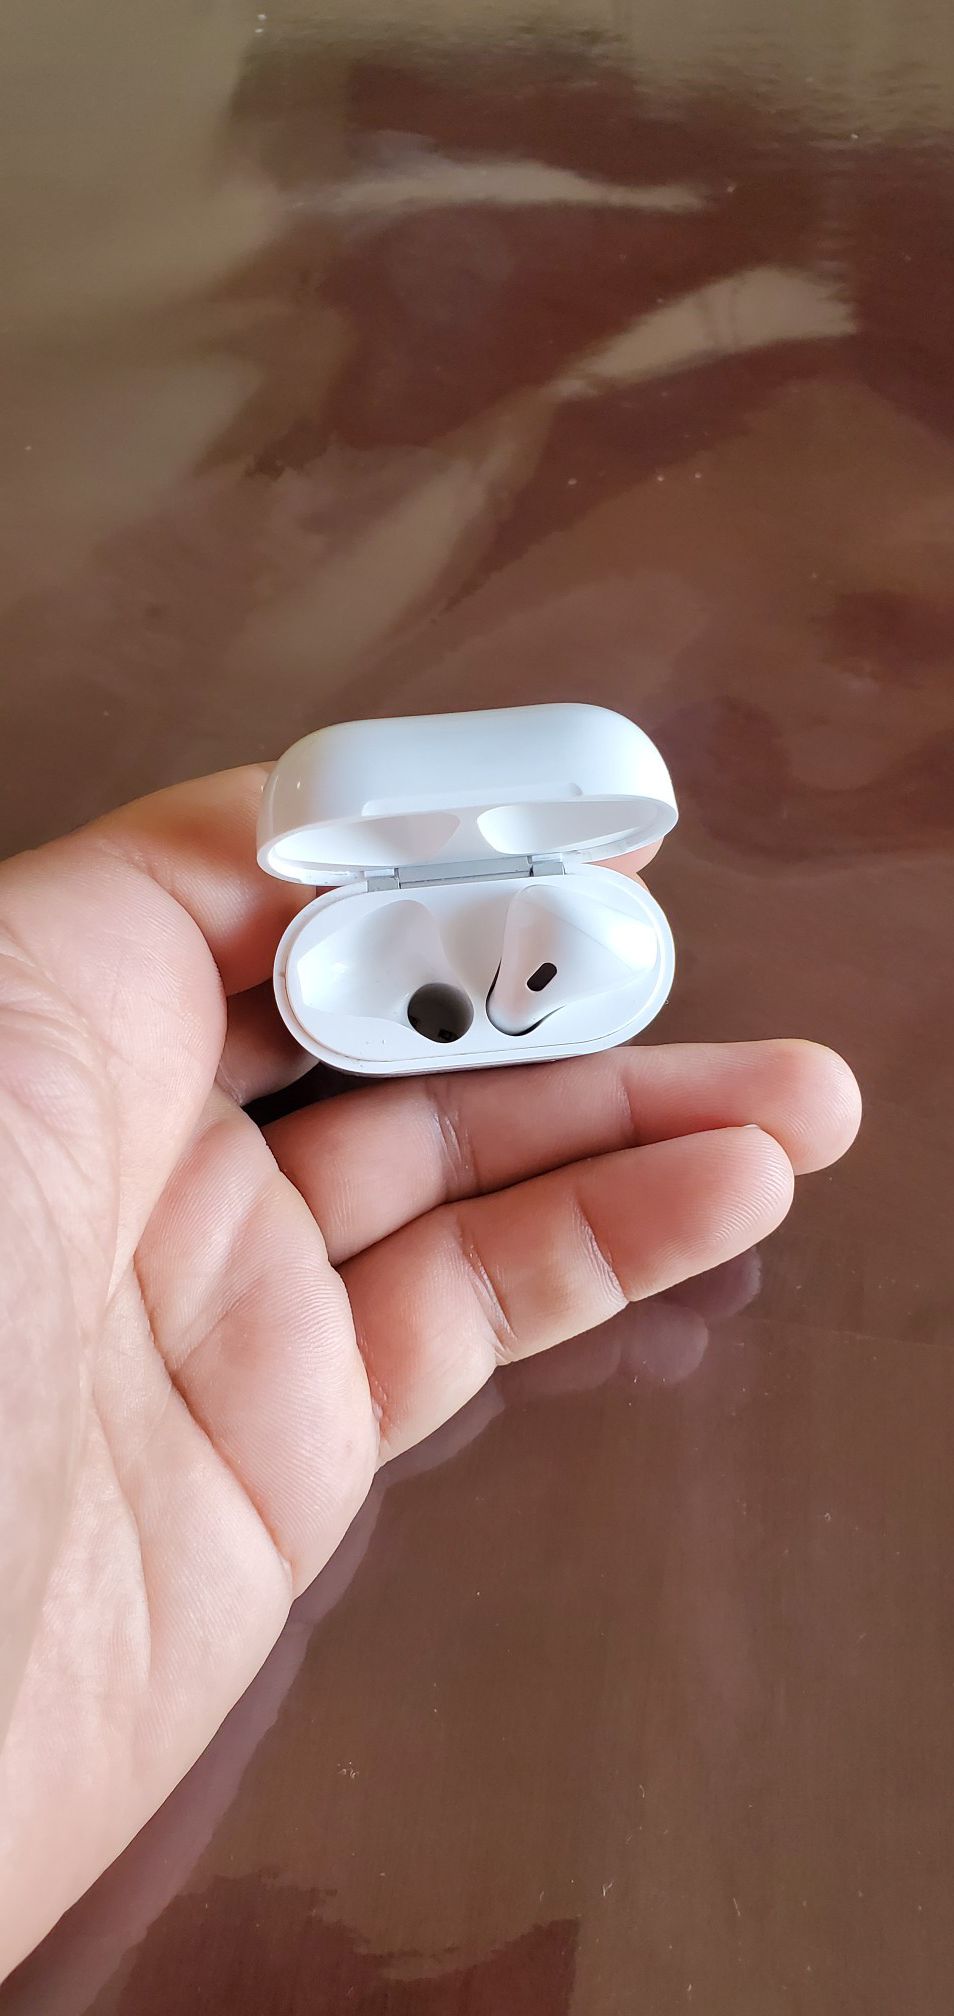 Airpod 2, only right side with case. Like new